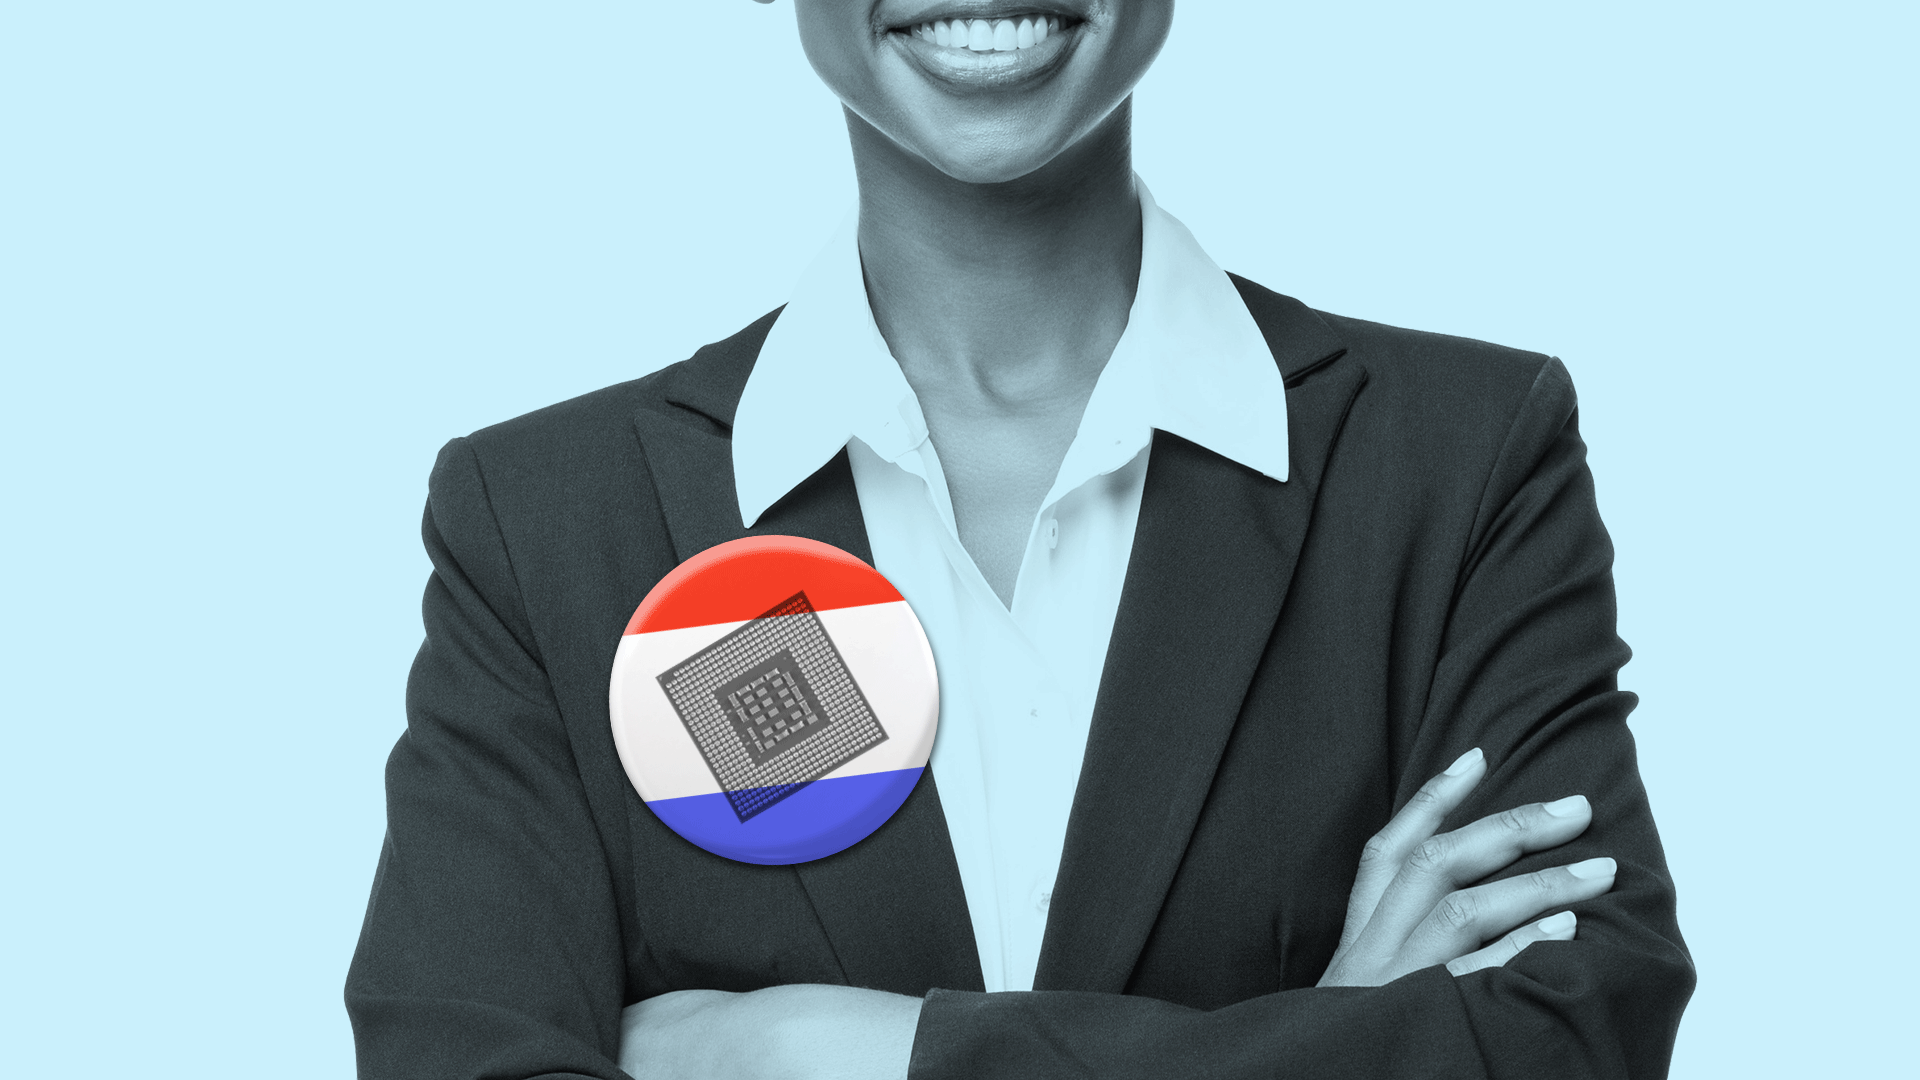 Animated GIF of candidate with button featuring various tech symbols